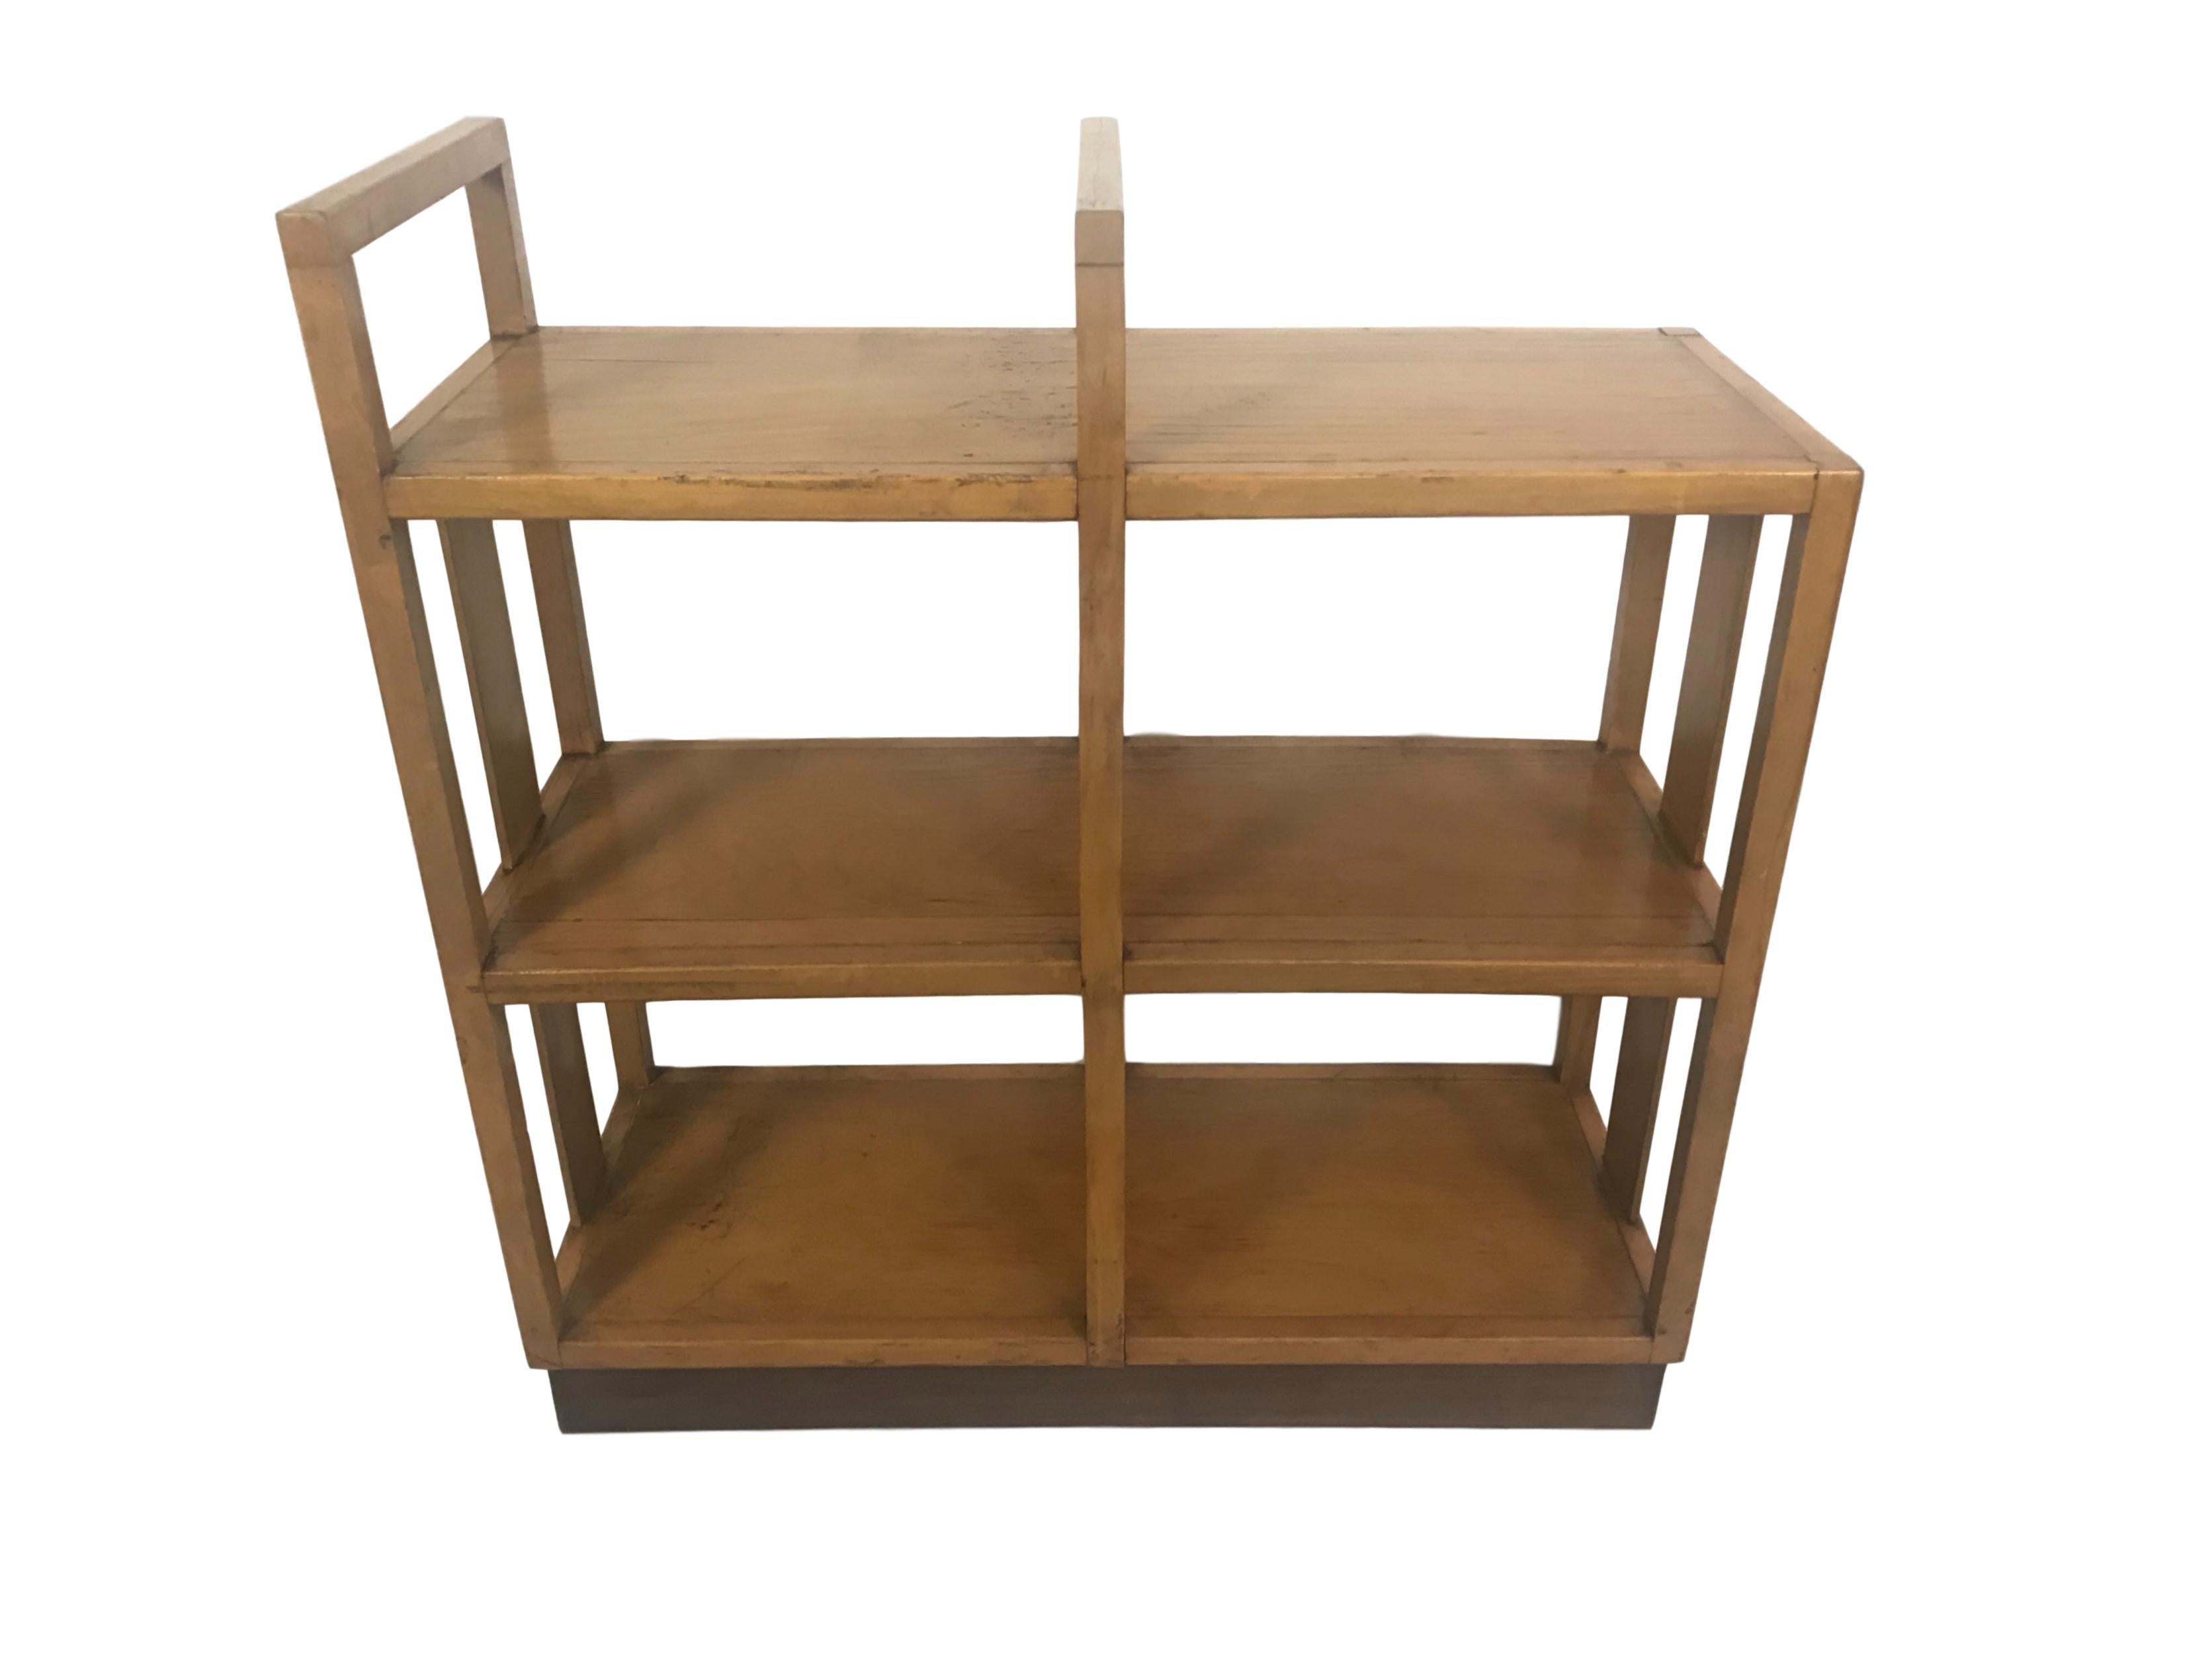 This is a midcentury bookshelf from a public library in Sweden with dark walnut base.